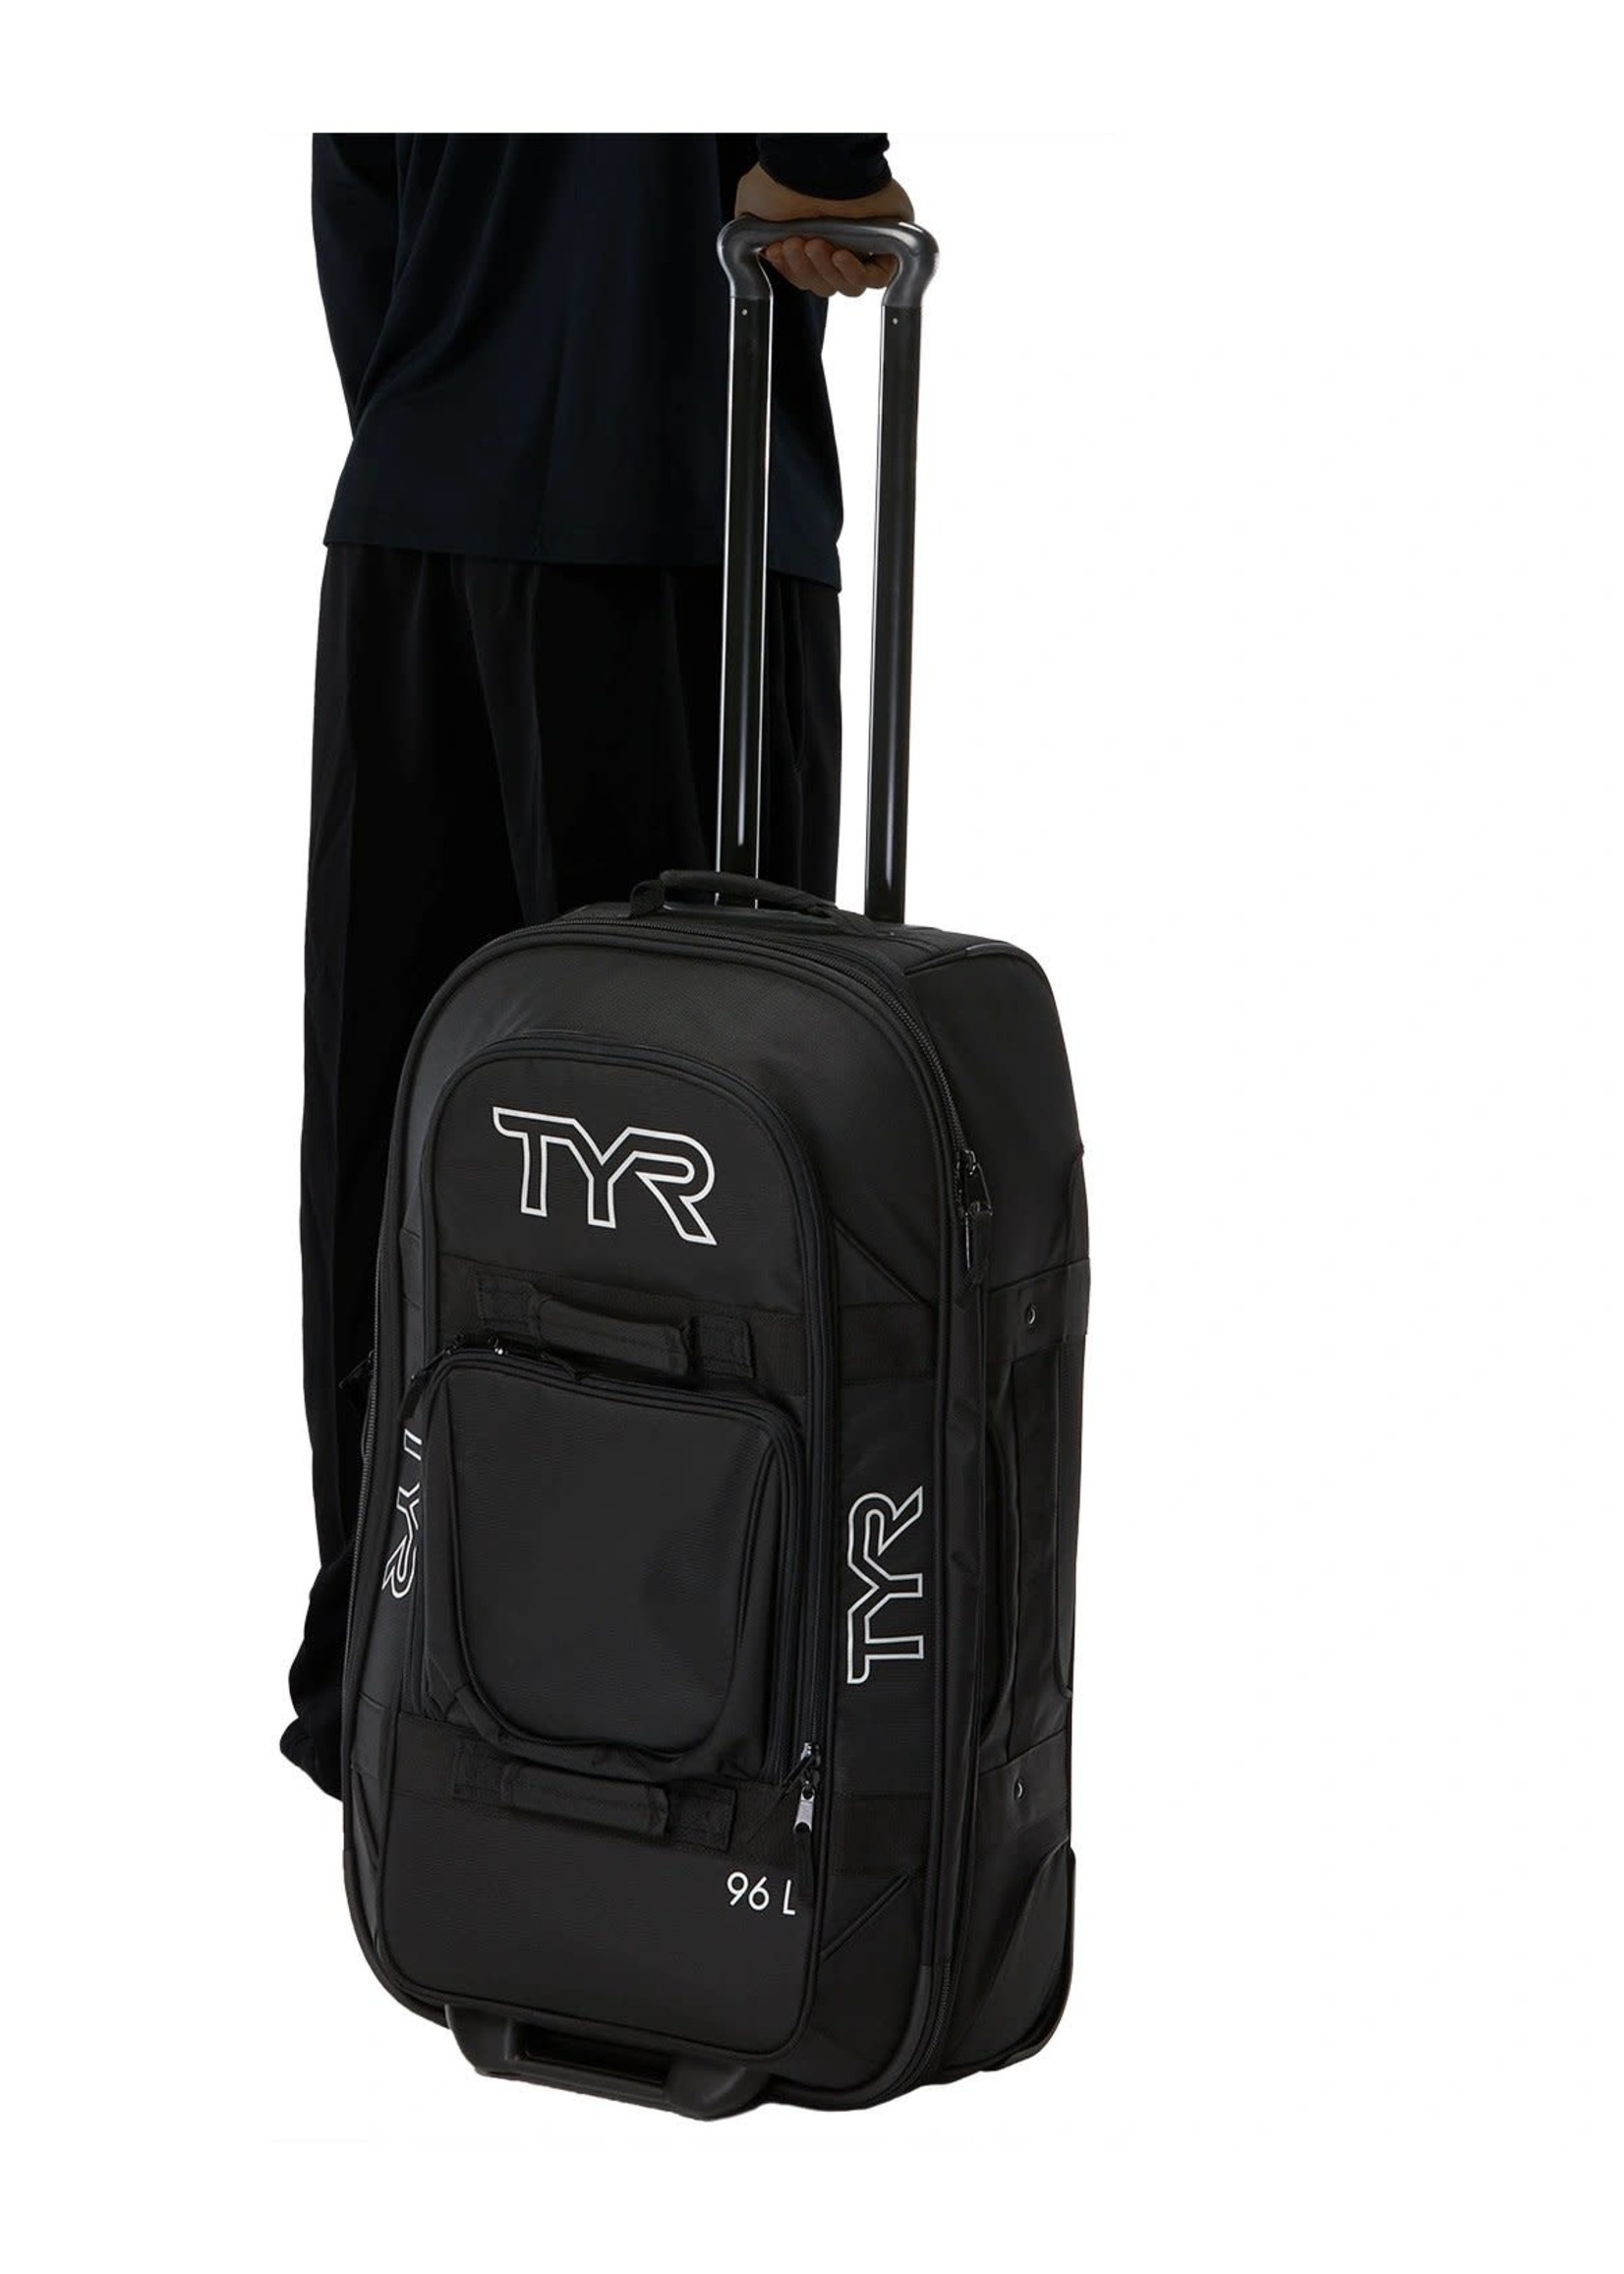 TYR TYR ALLIANCE CHECK-IN BAG